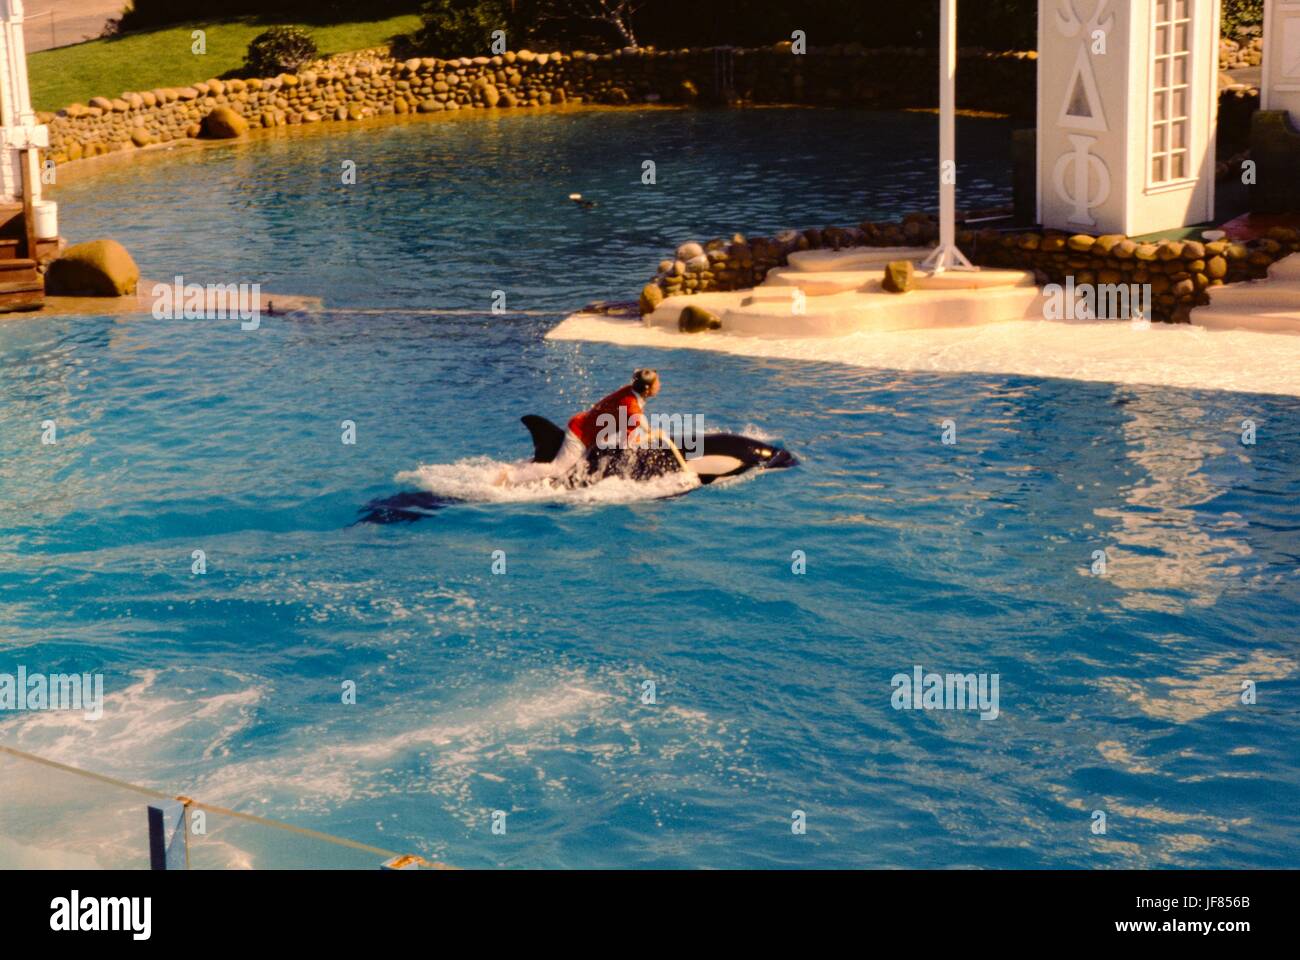 A trainer rides on the back of an orca during a shower at Seaworld, San Diego, California, 1975. Stock Photo